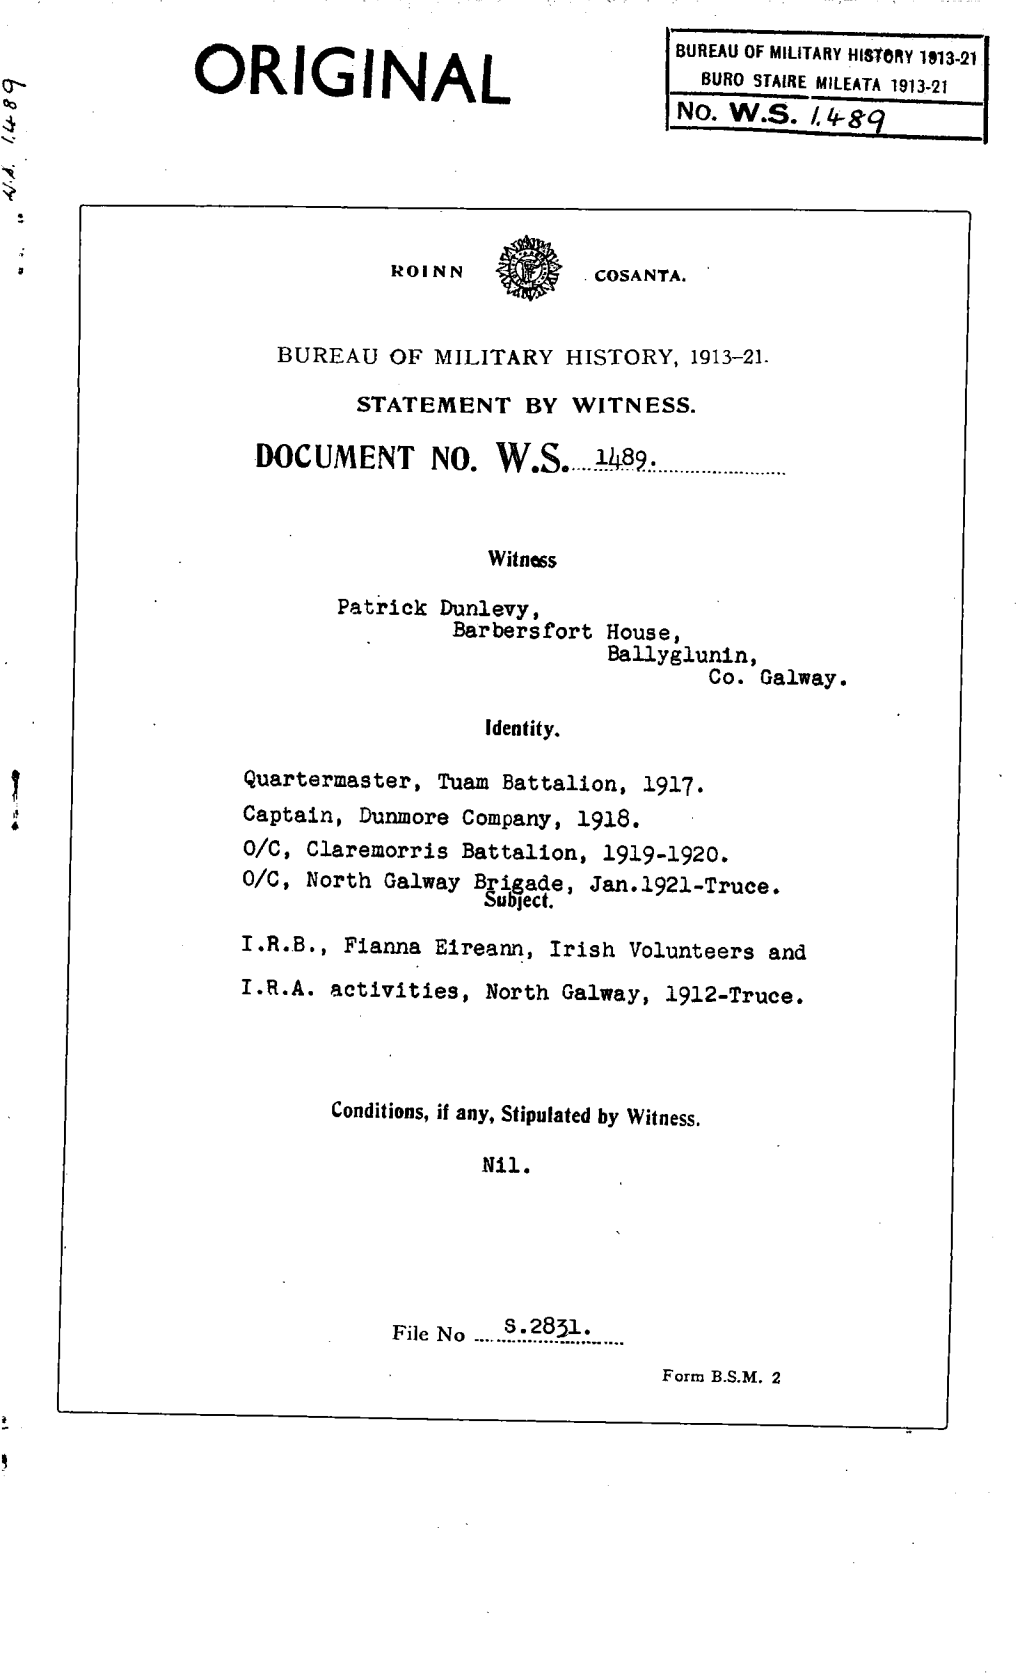 ROINN COSANTA. BUREAU of MILITARY HISTORY, 1913-21 STATEMENT by WITNESS. DOCUMENT NO. W.S. 1489. Witness Patrick Dunlevy, Barber